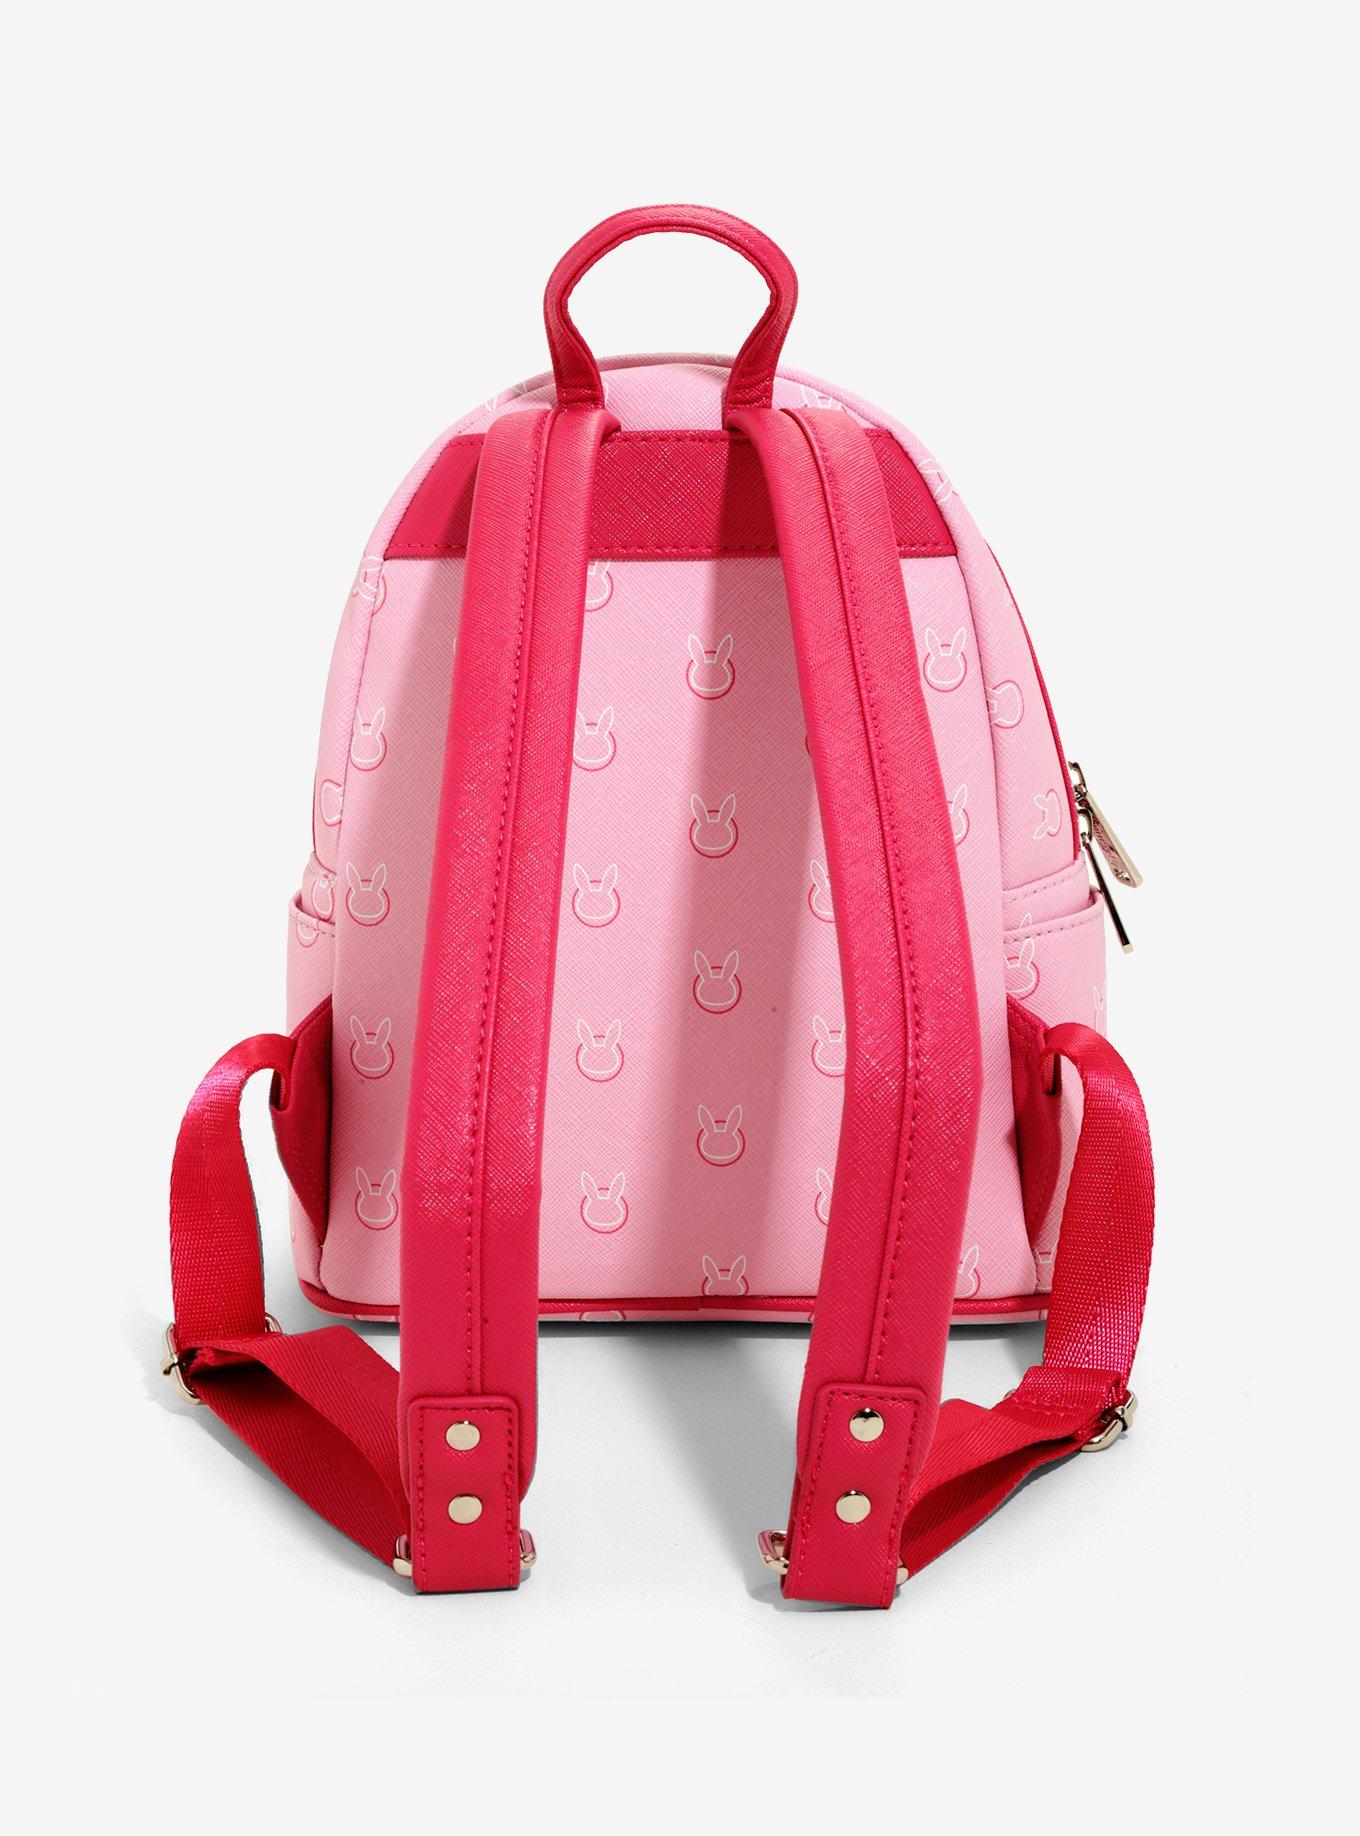 Loungefly D.Va Overwatch pink mini backpack - RARE BoxLunch exclusive